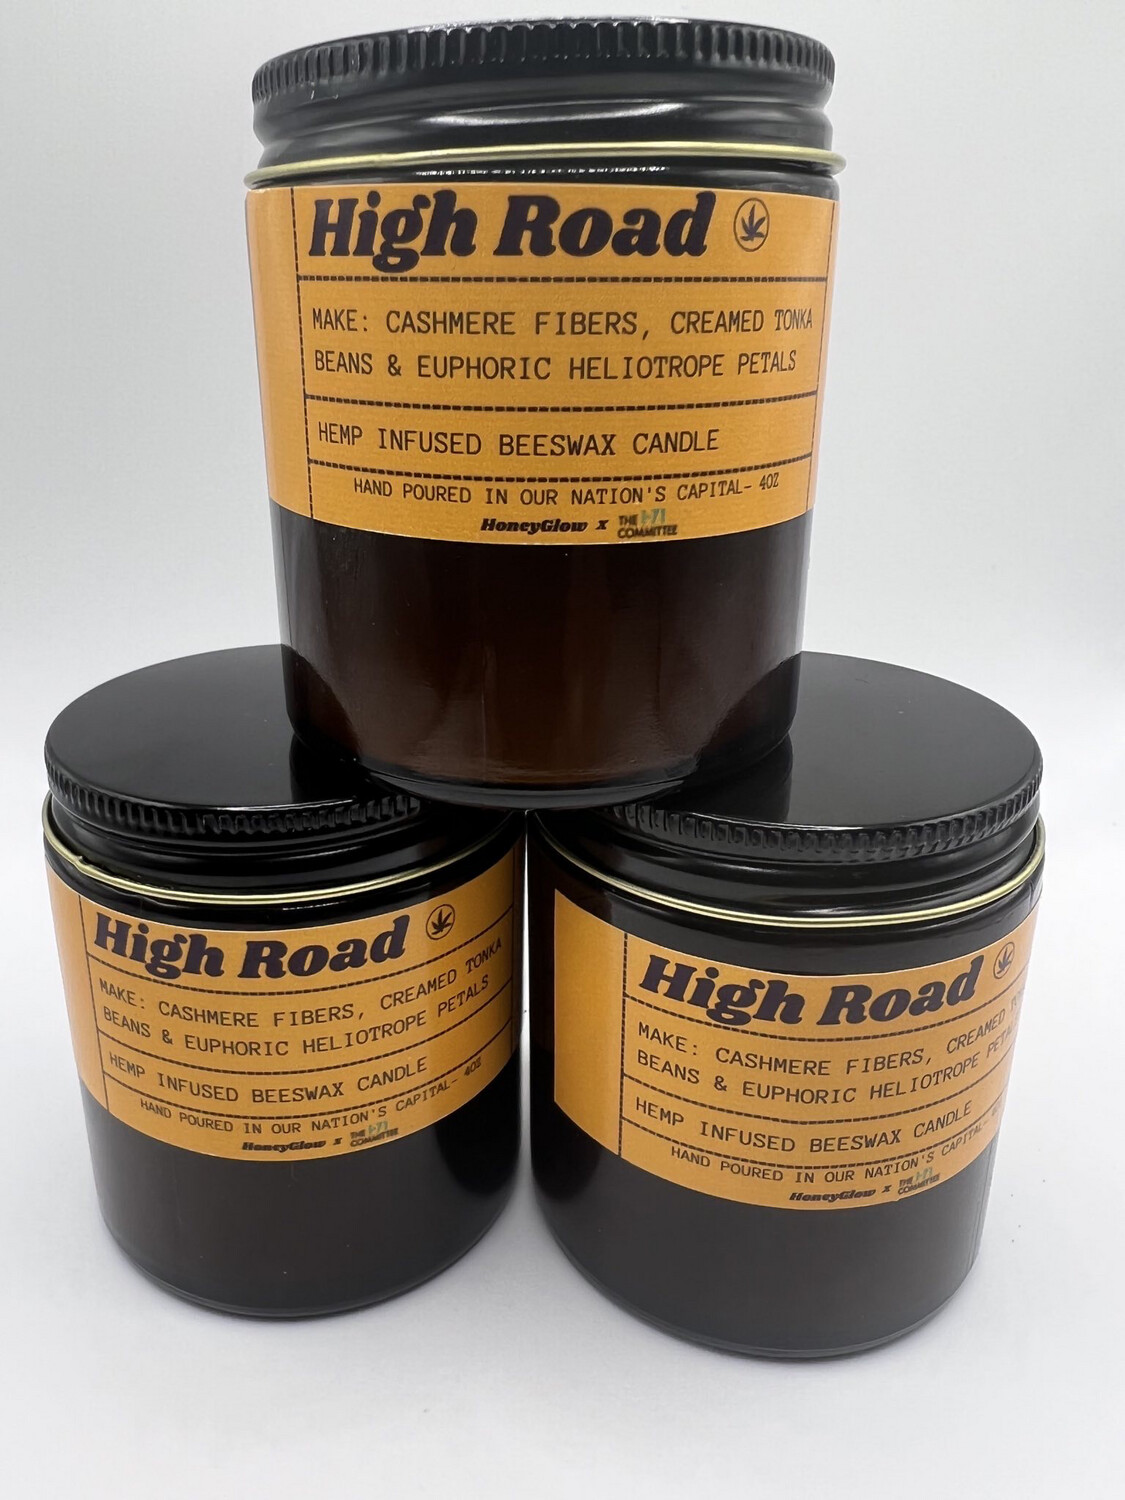 High Road Hemp Infused Beeswax Candle